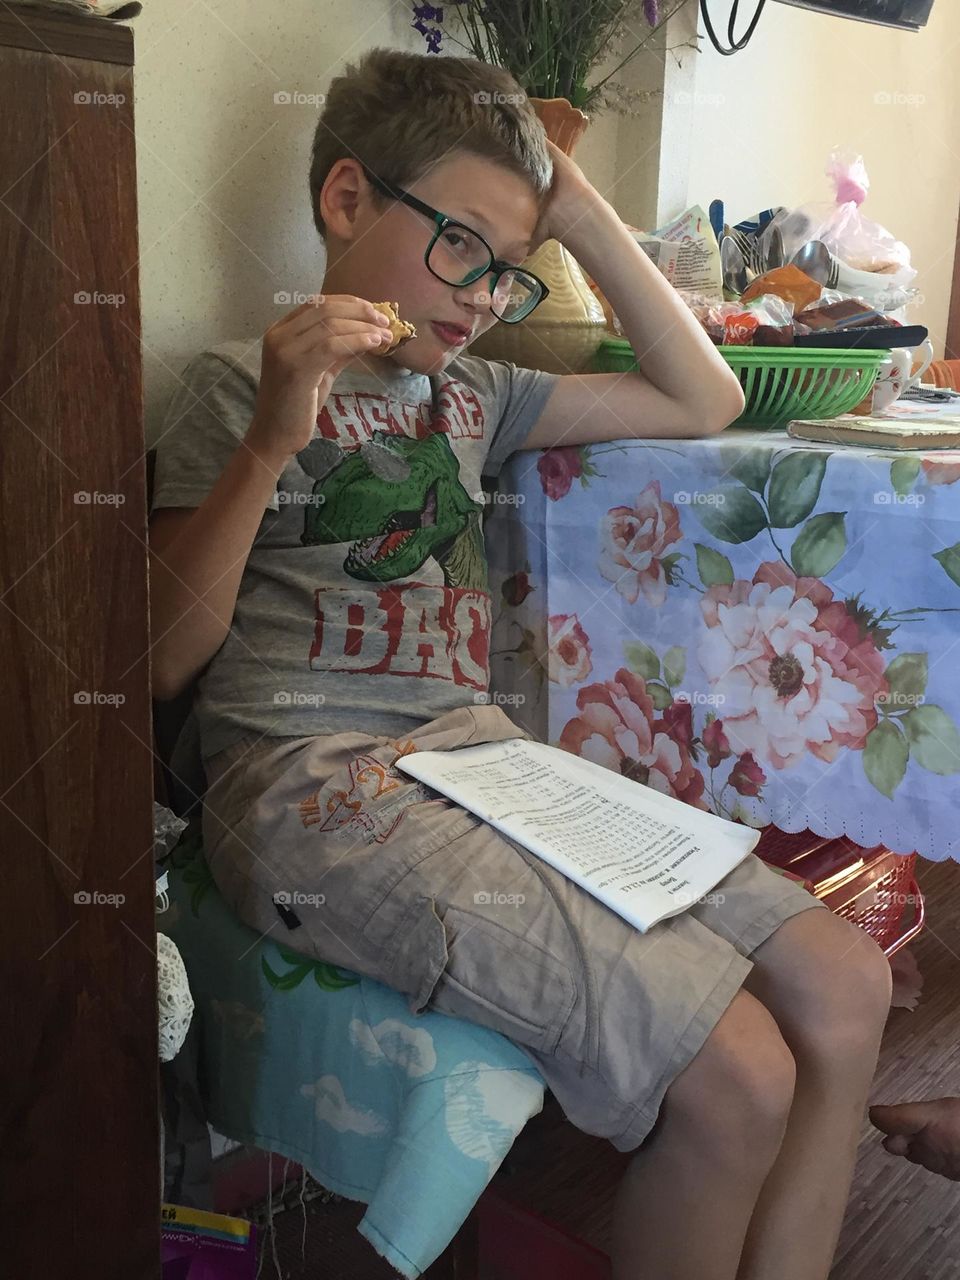 Teenager boy in glasses sits at a table and reads